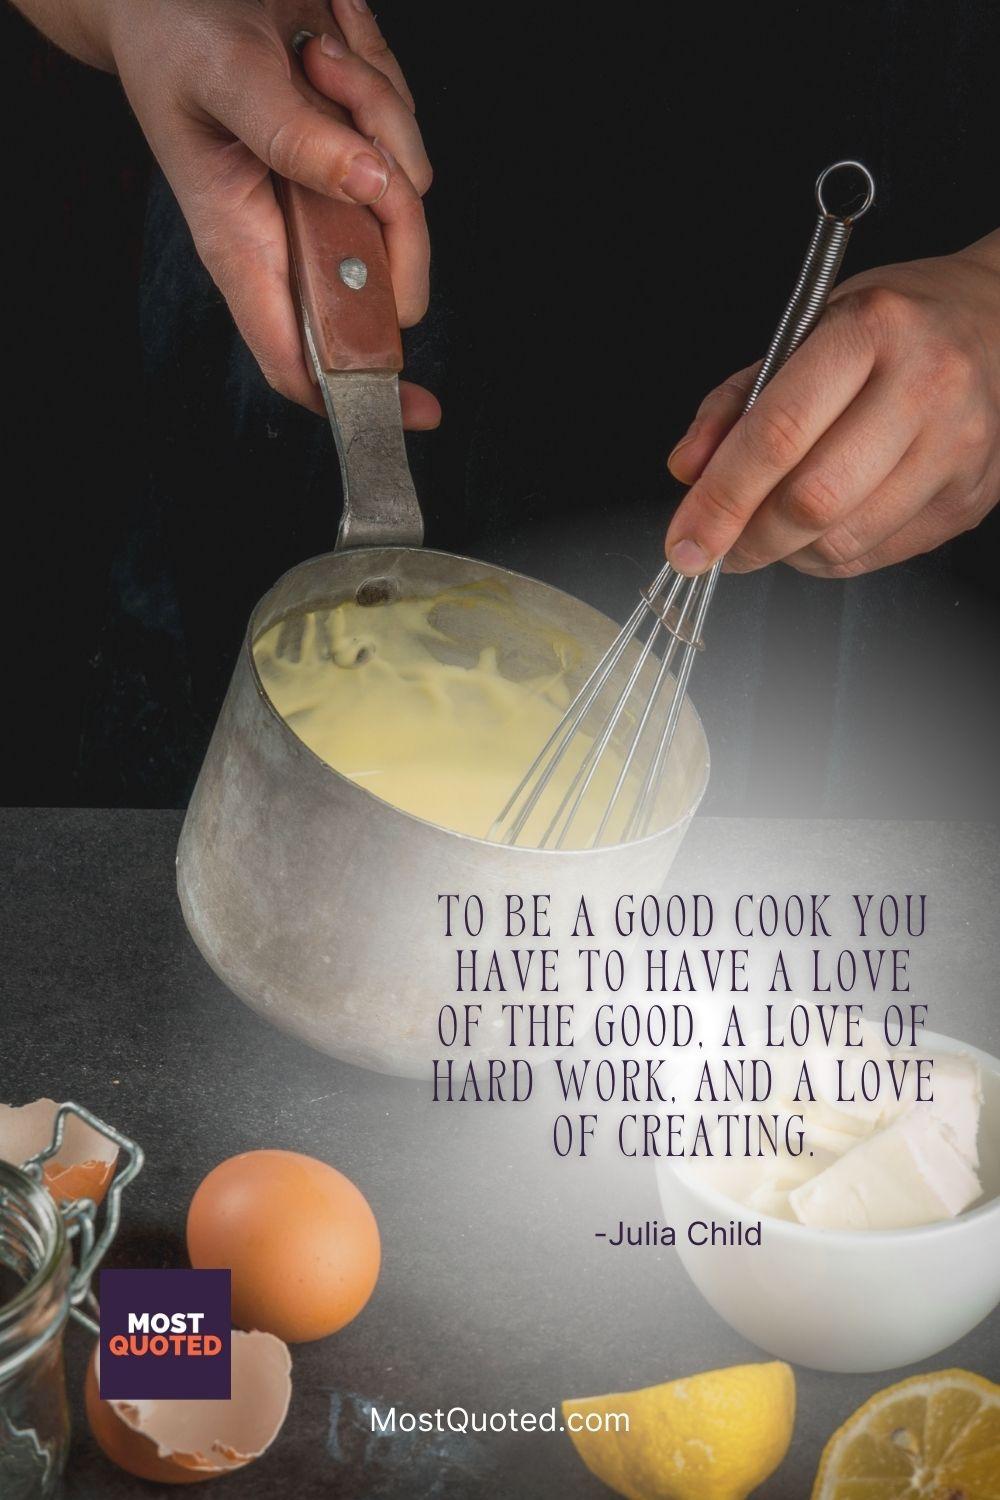 To be a good cook you have to have a love of the good, a love of hard work, and a love of creating. - Julia Child